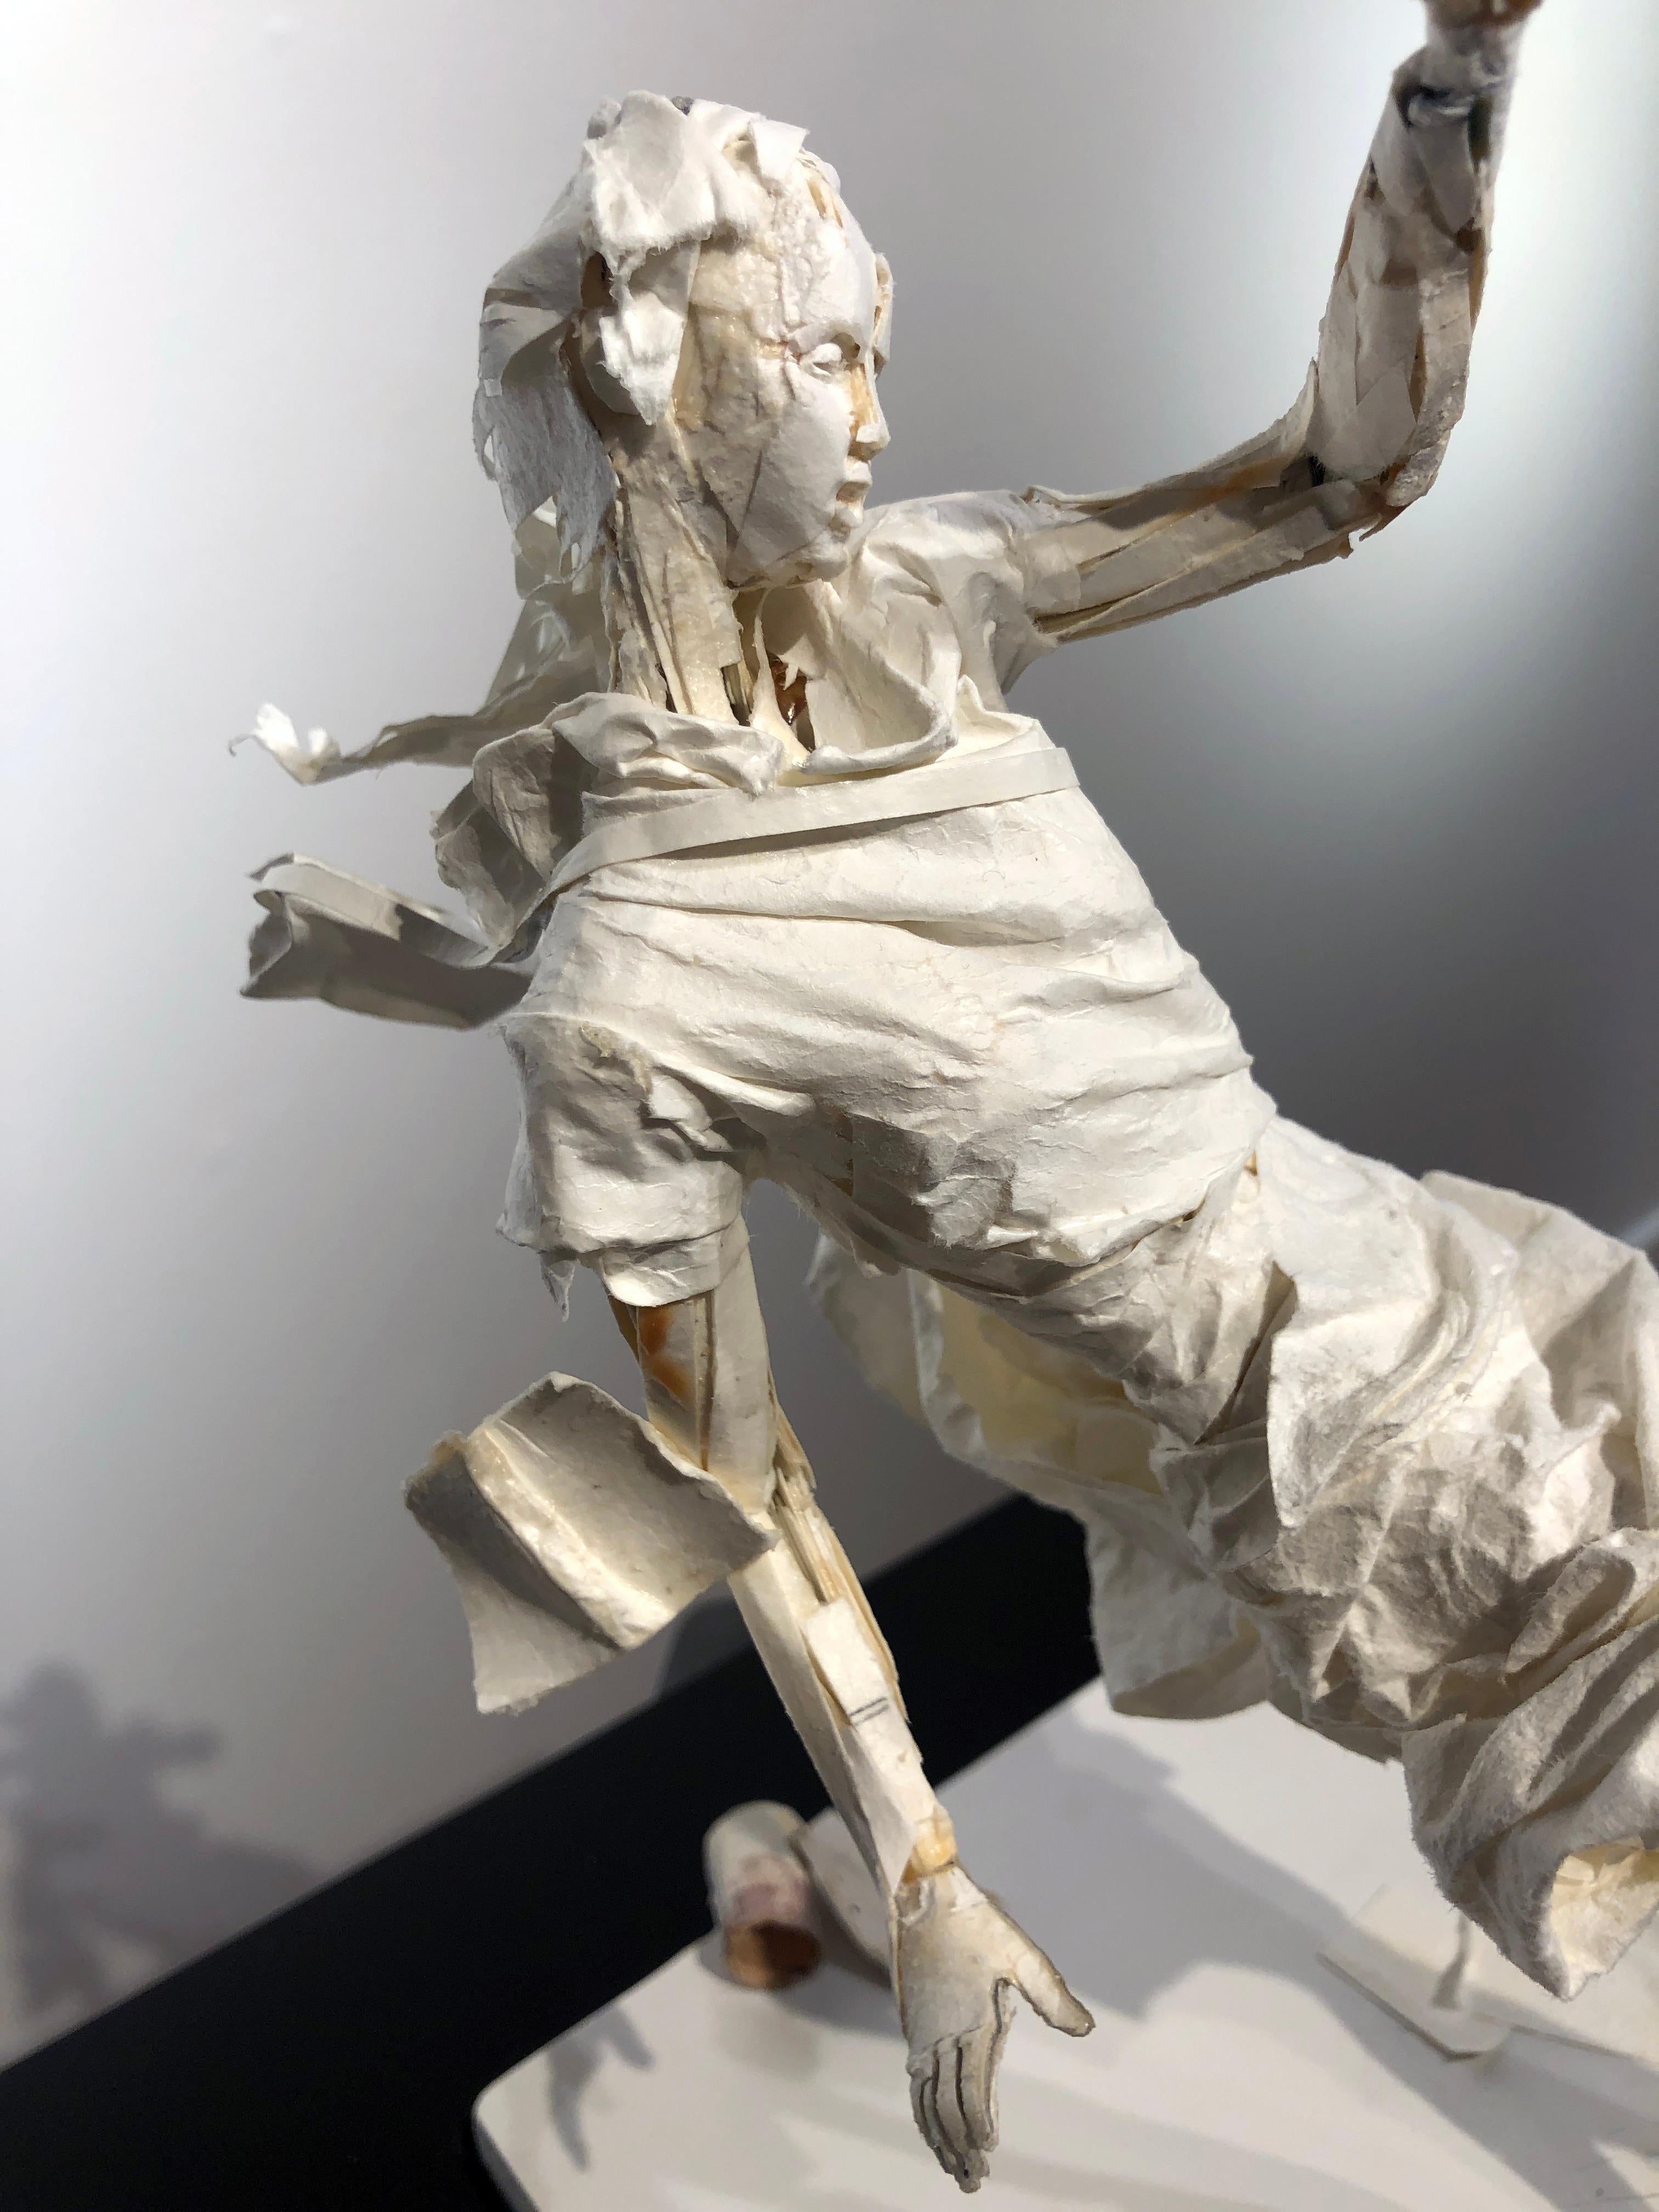 The East Wind Rises - Highly Detailed Paper Sculpture of Woman in a Wind Storm 6